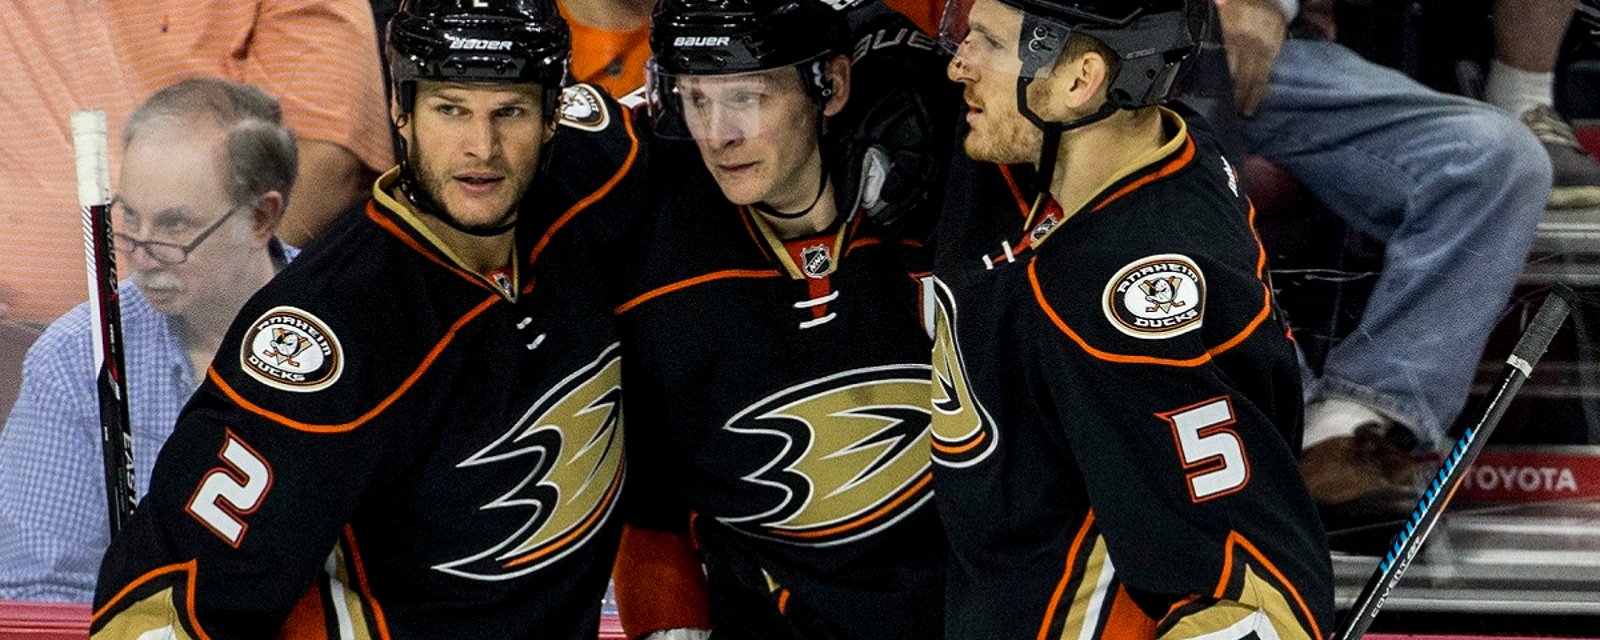 Breaking: Ducks may get two injured players back tonight!